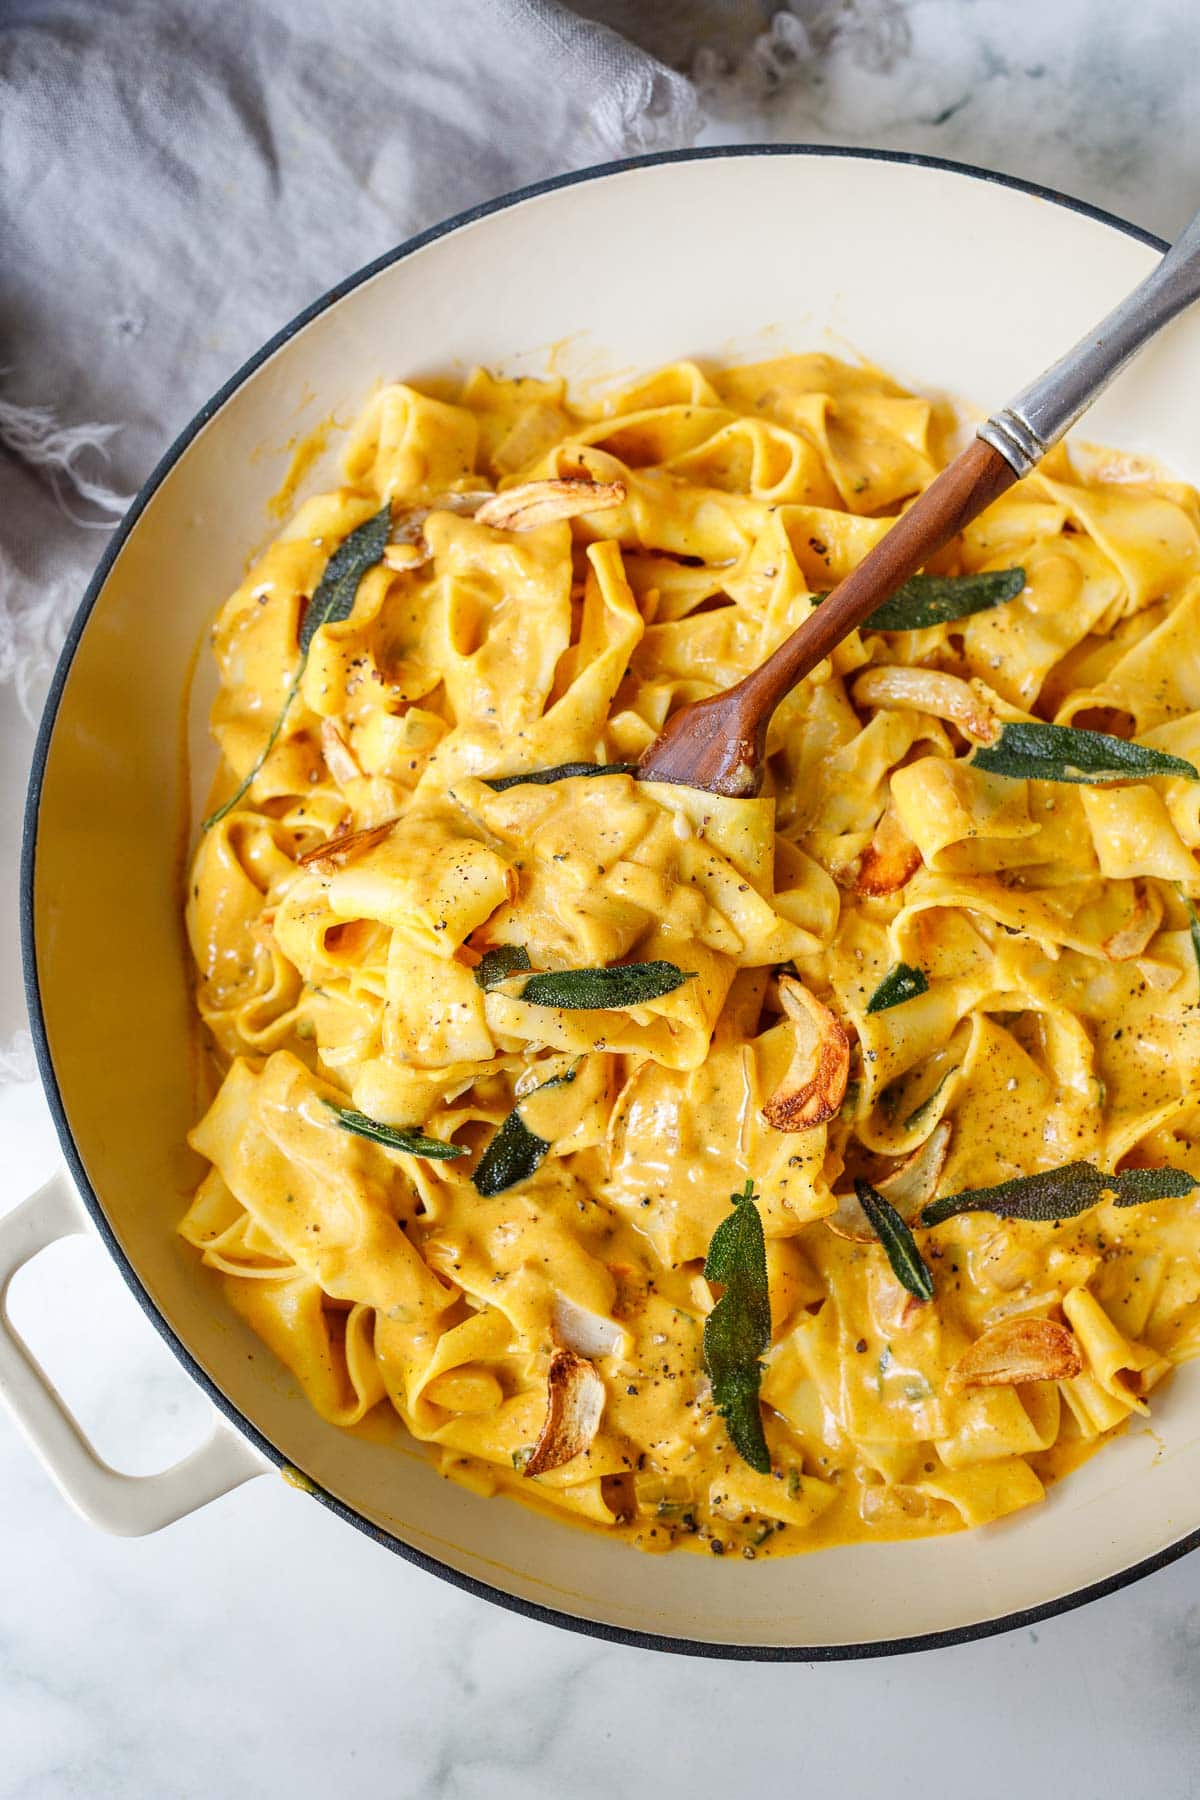 This creamy Pumpkin Pasta recipe is made with canned pumpkin, coconut milk, sage and garlic- simple ingredients in under 15 minutes. Deceptively vegan, it will soon become your new favorite!